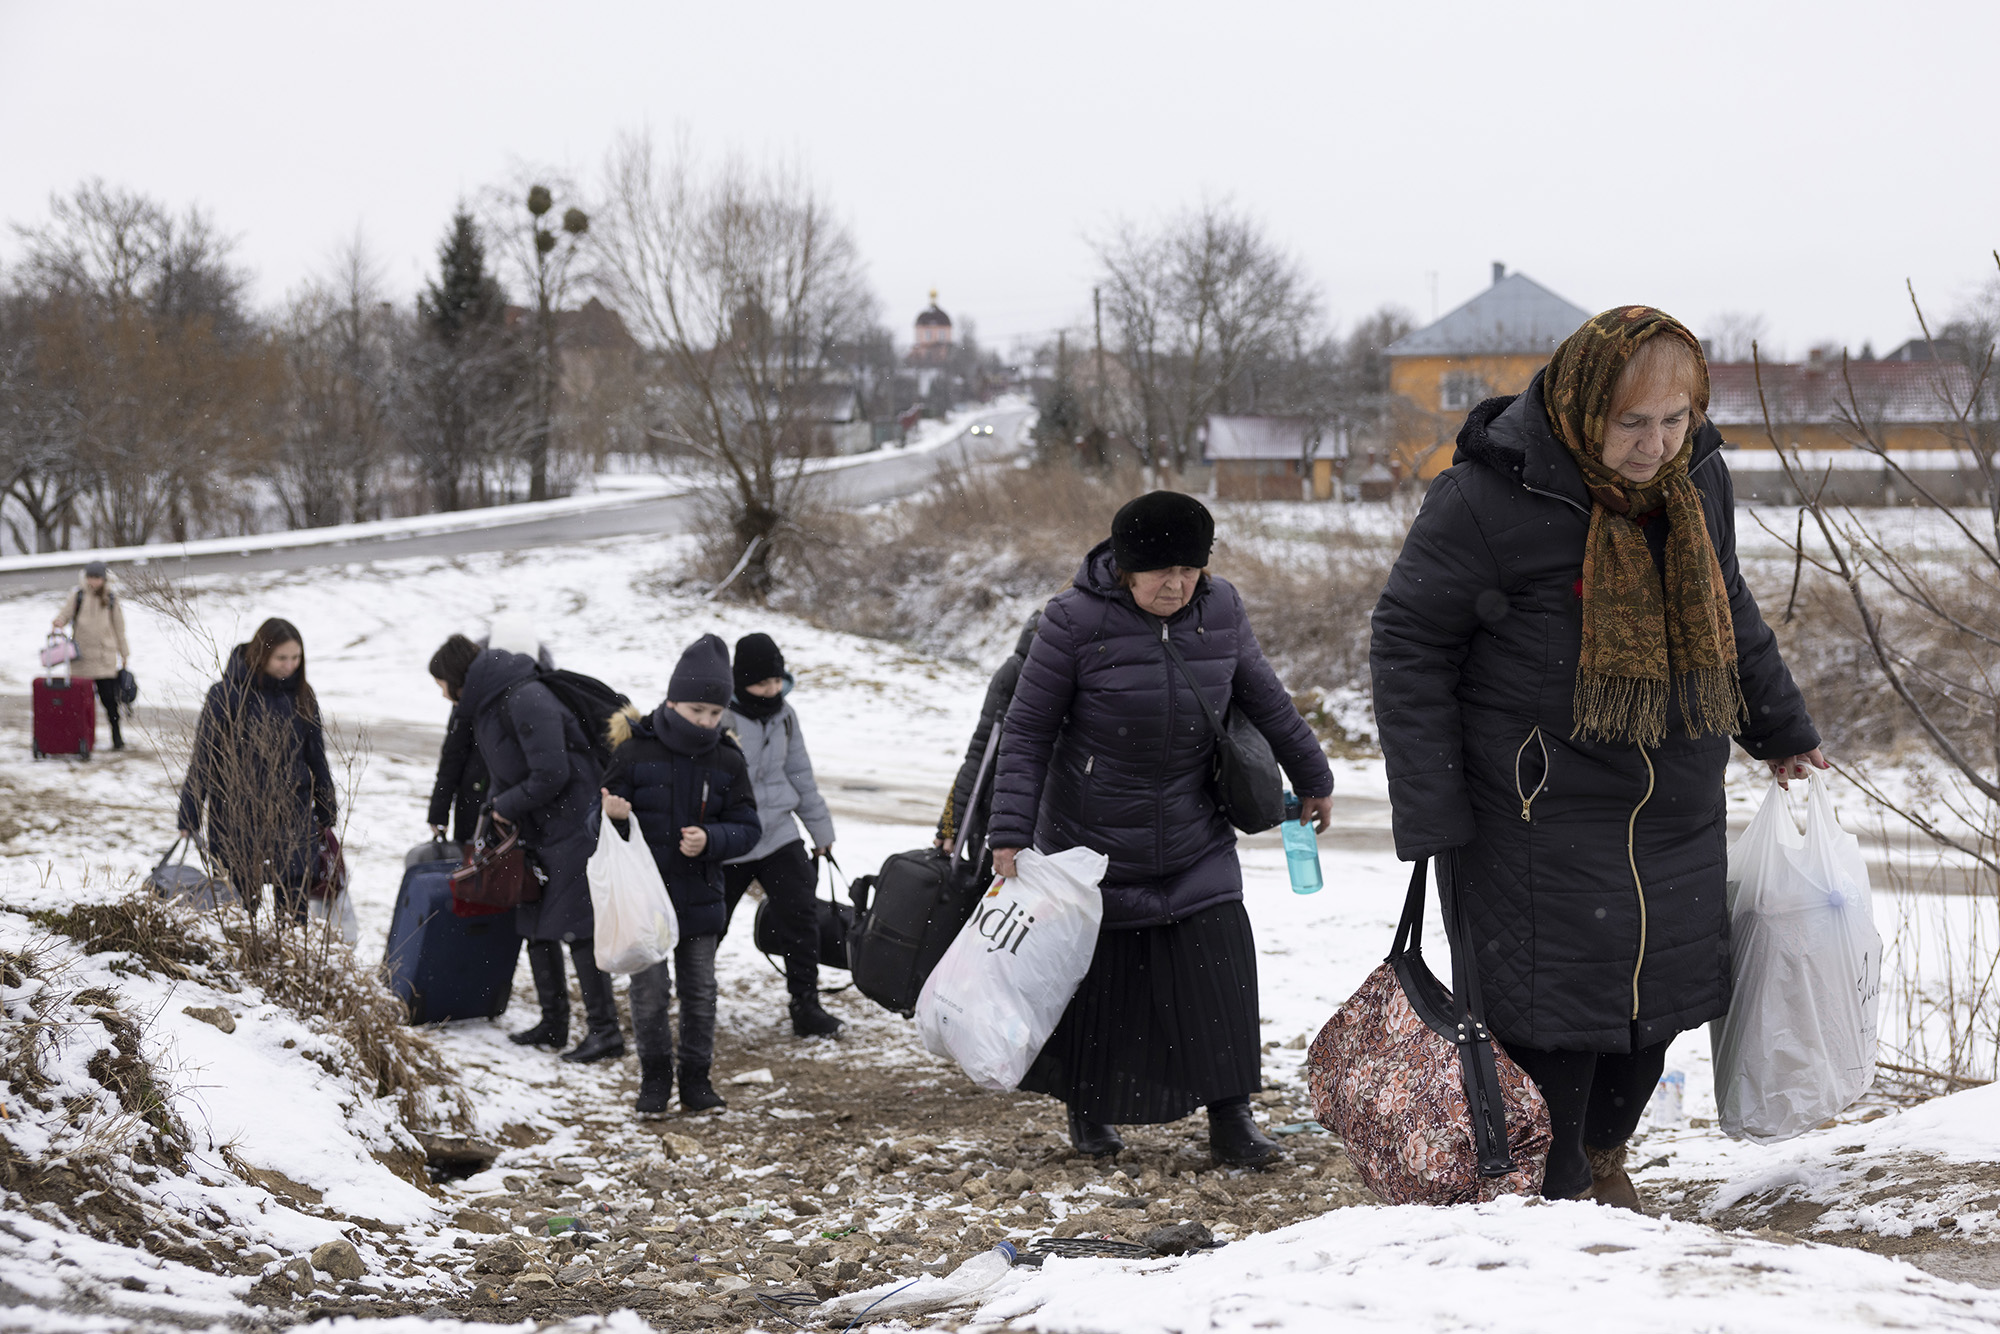 Refugees fleeing conflict make their way to the Krakovets border crossing with Poland on March 9, in Krakovets, Ukraine. 